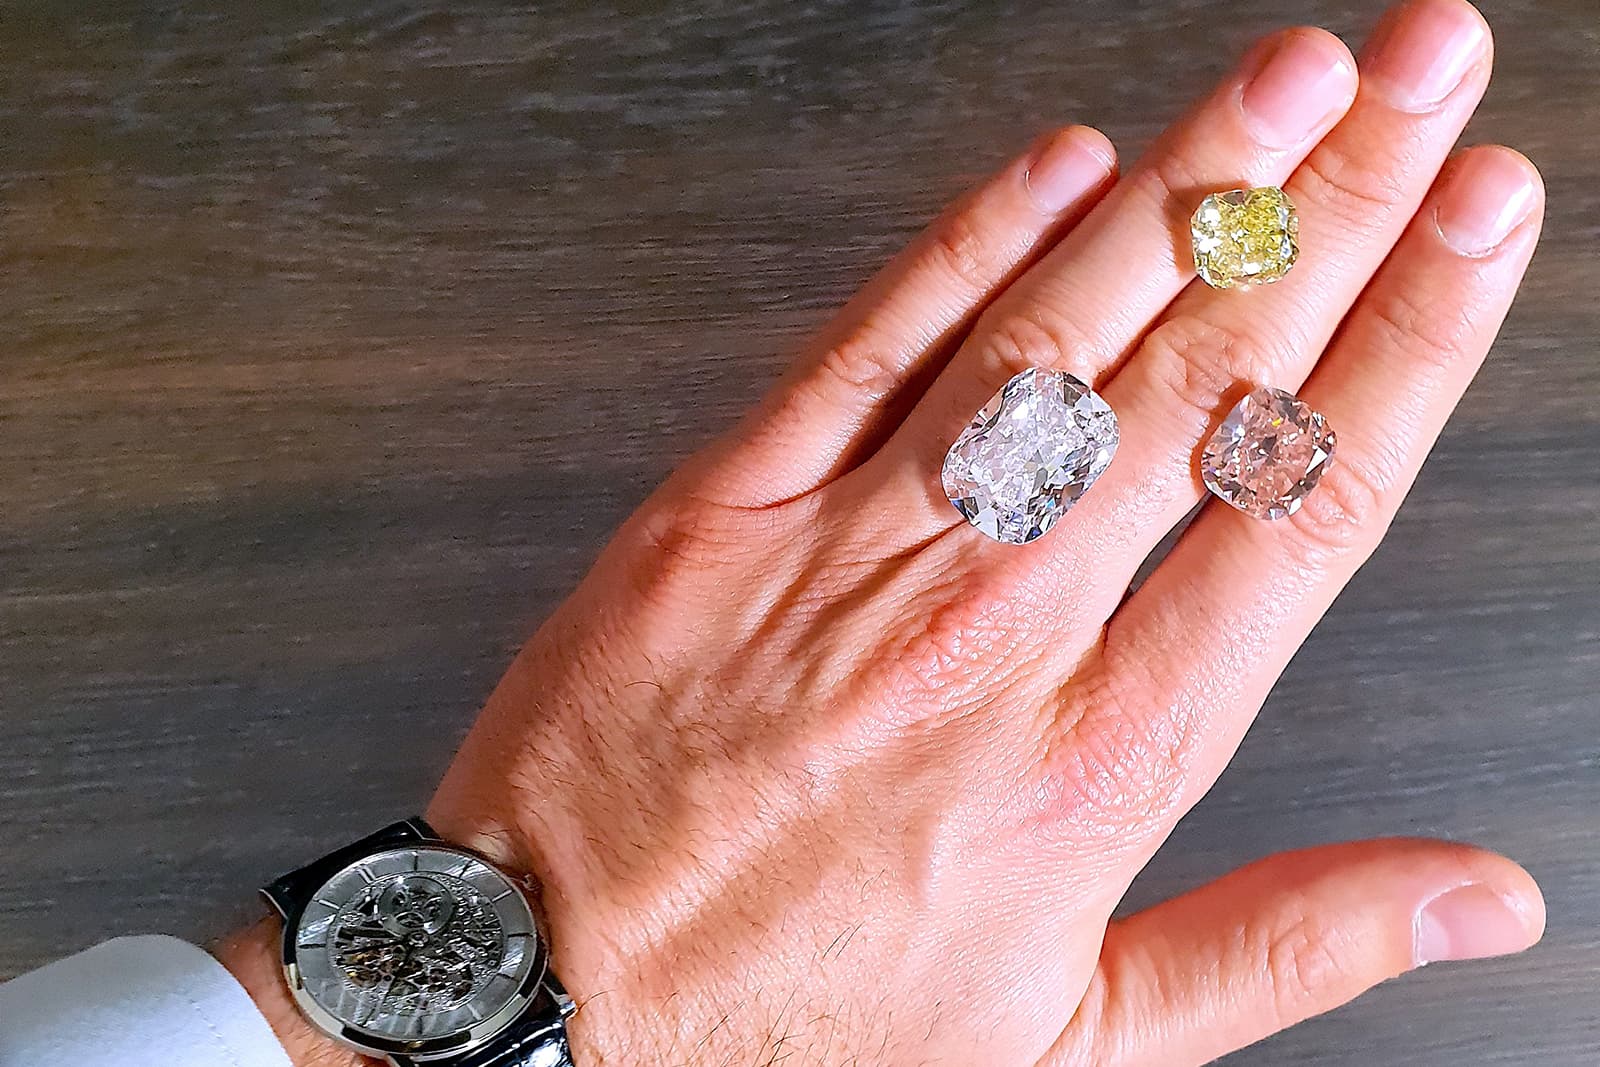 LEVUMA CEO Ali Khalil predicts that the finest specimens, including D Flawless diamonds and special coloured diamonds, particularly blue and pink stones, will grow in value in the coming years